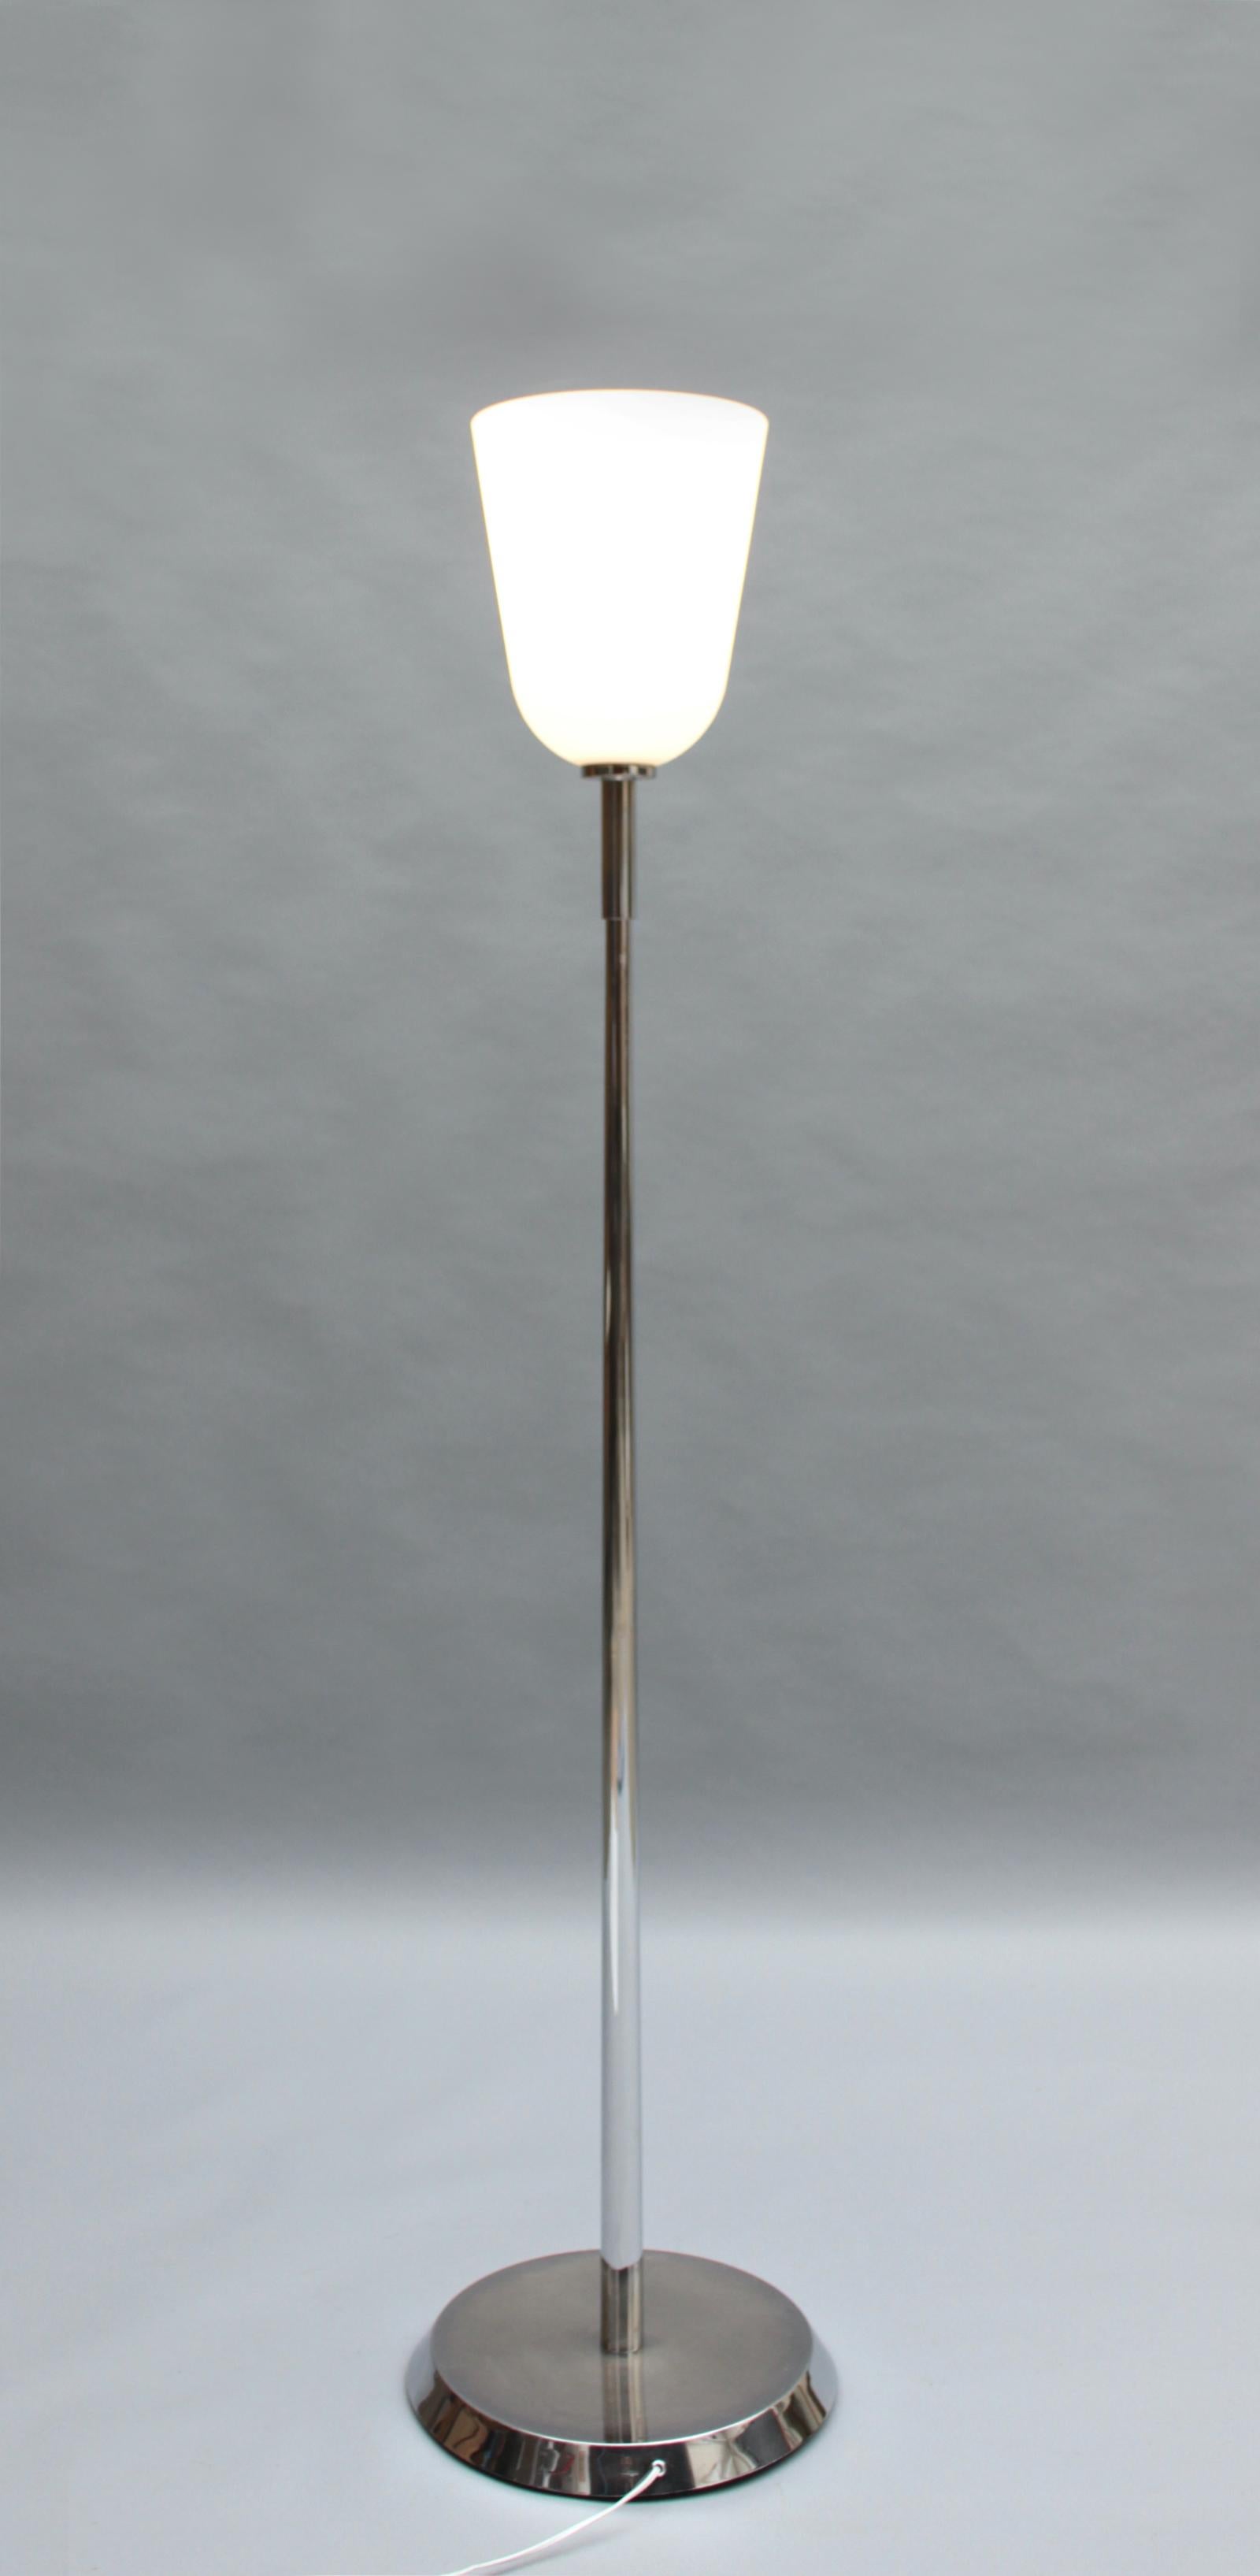 With a thick glass and chrome bowl shade mounted on a chrome stem and round base.